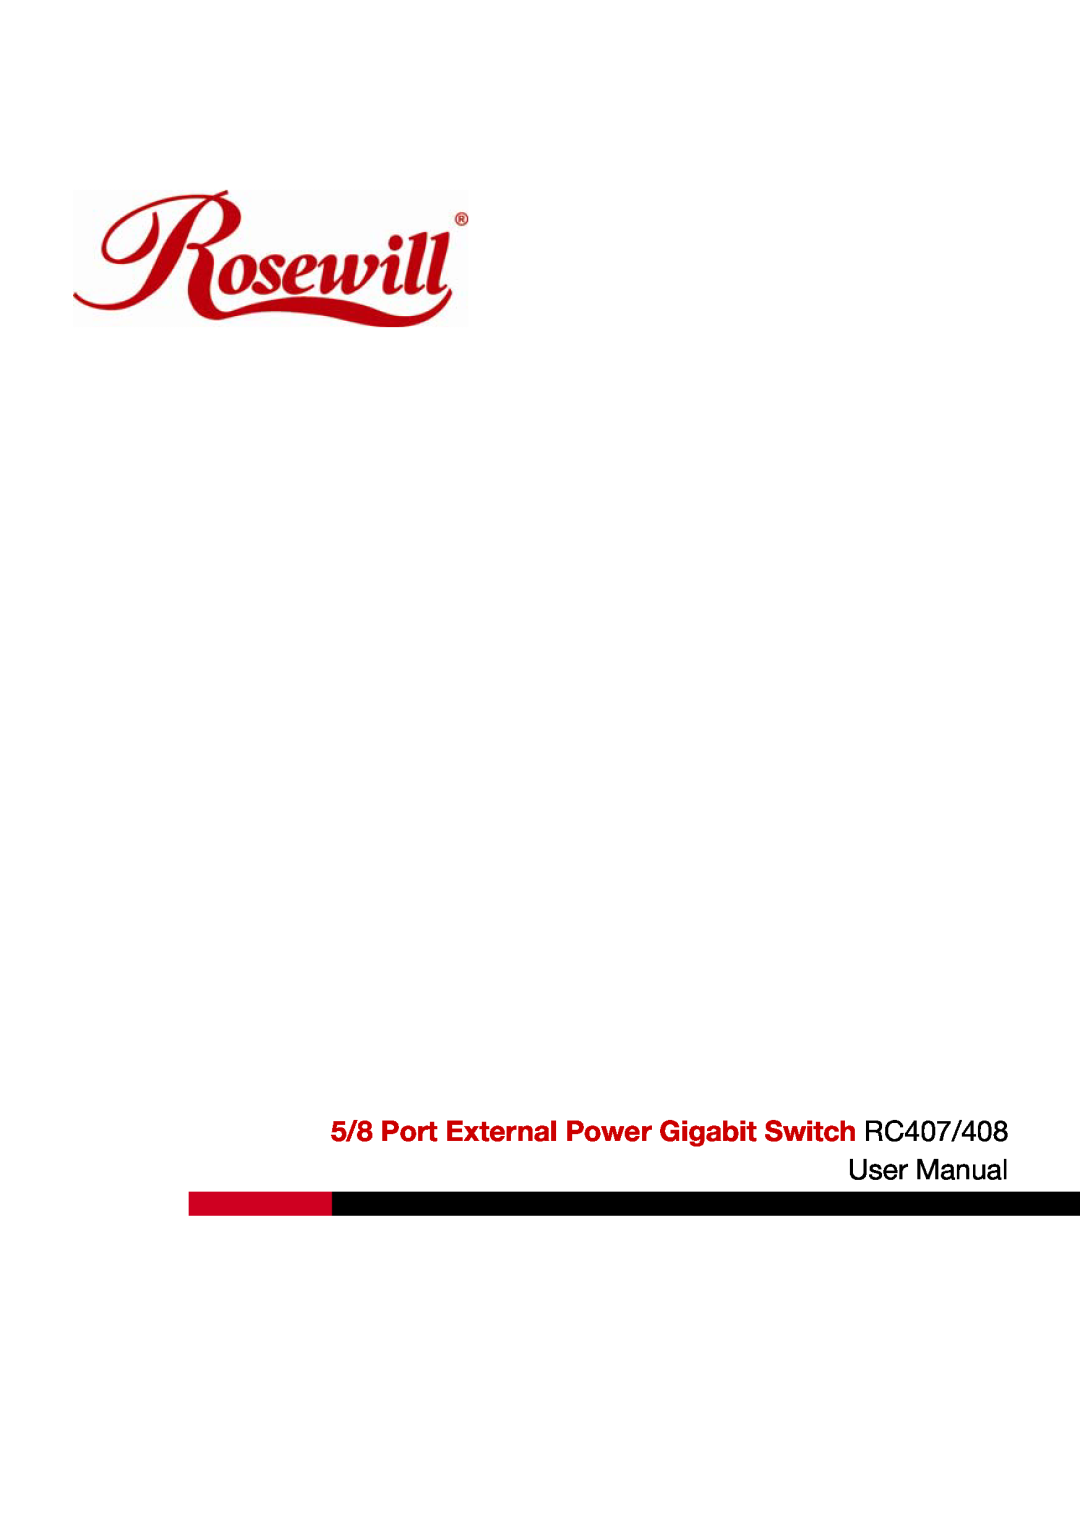 Rosewill RC-407, RC-408 user manual 5/8 Port External Power Gigabit Switch RC407/408 